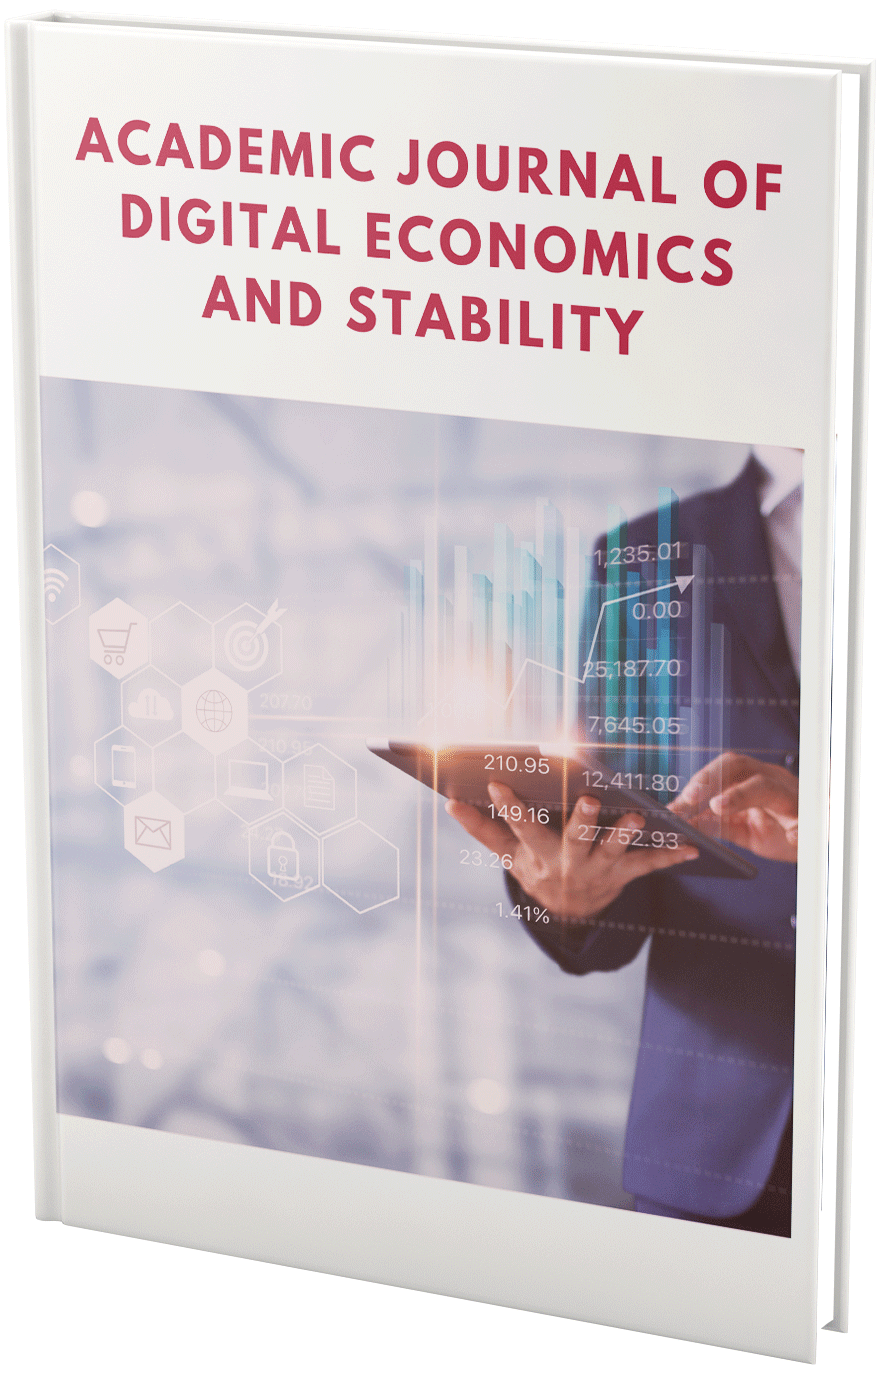 					View Vol. 1 (2021): Academic Journal of Digital Economics and Stability
				